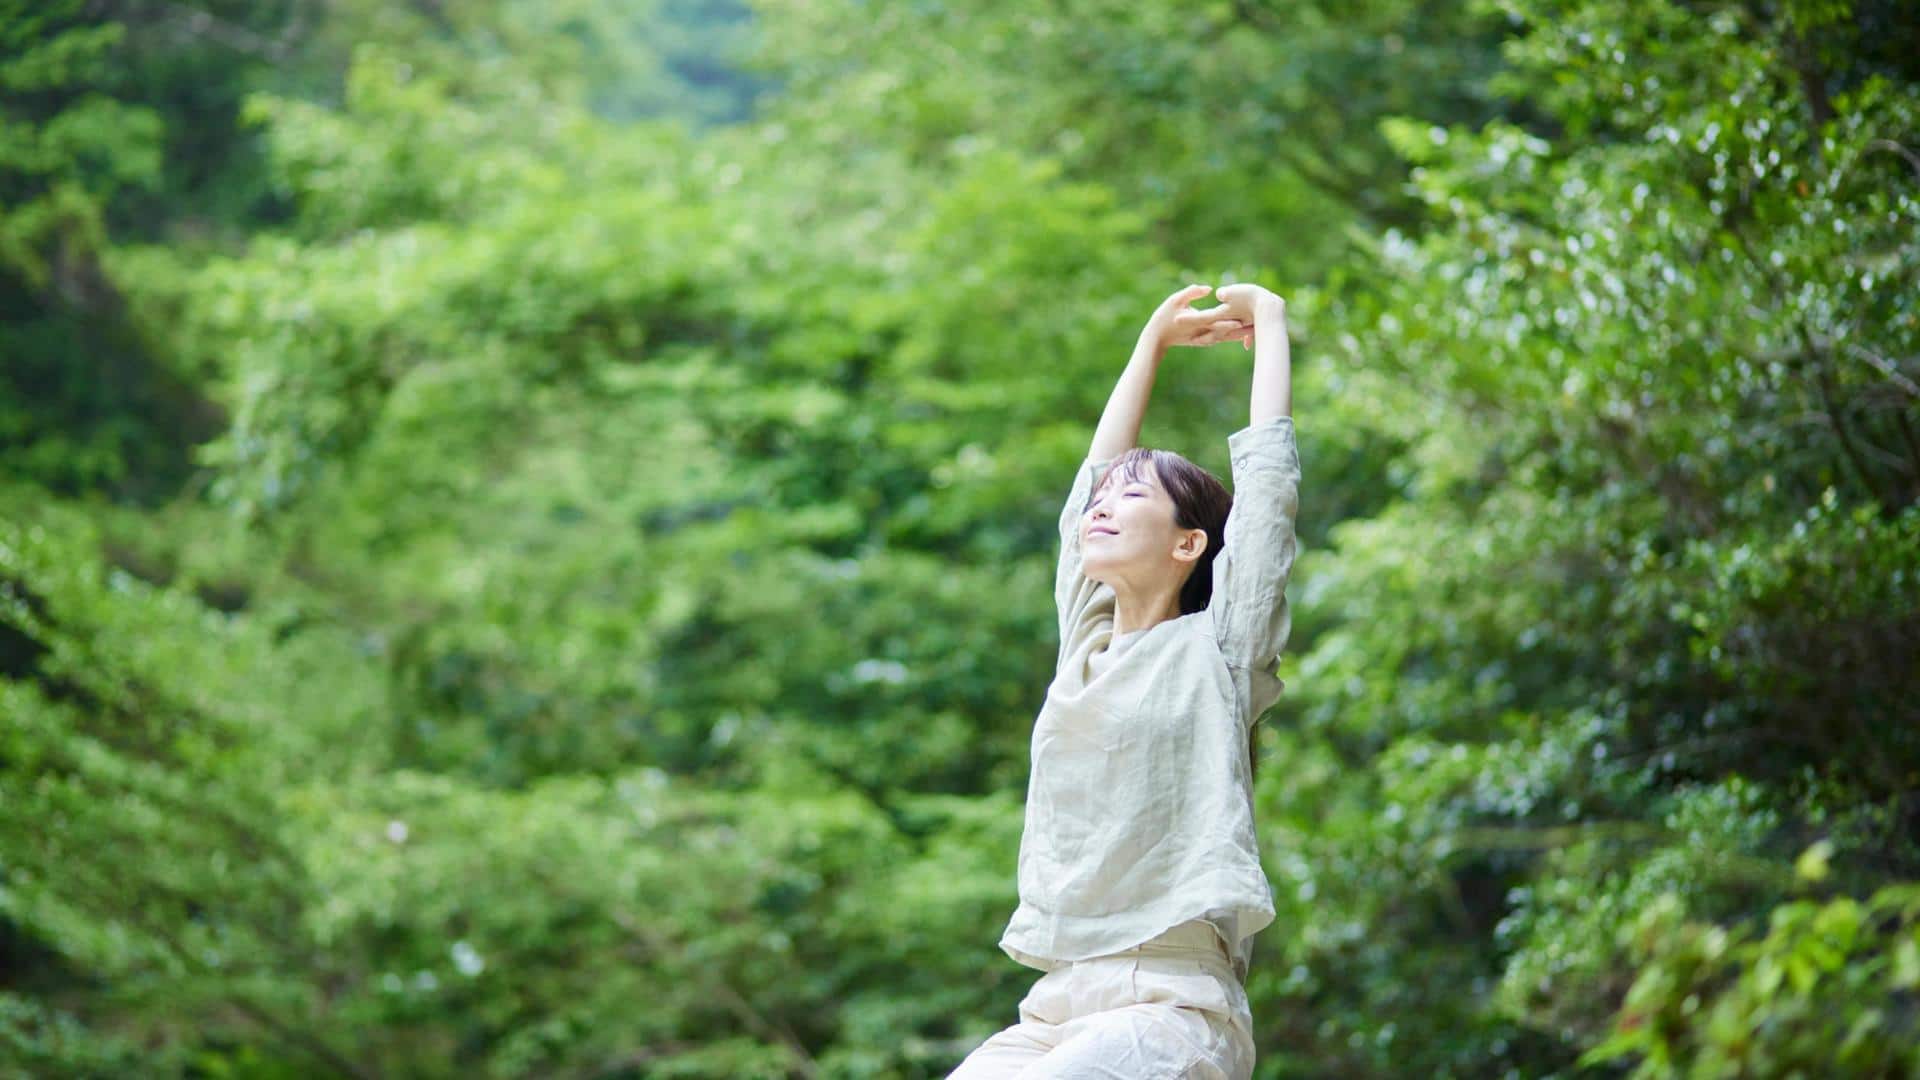 5 Japanese concepts that can potentially transform your life